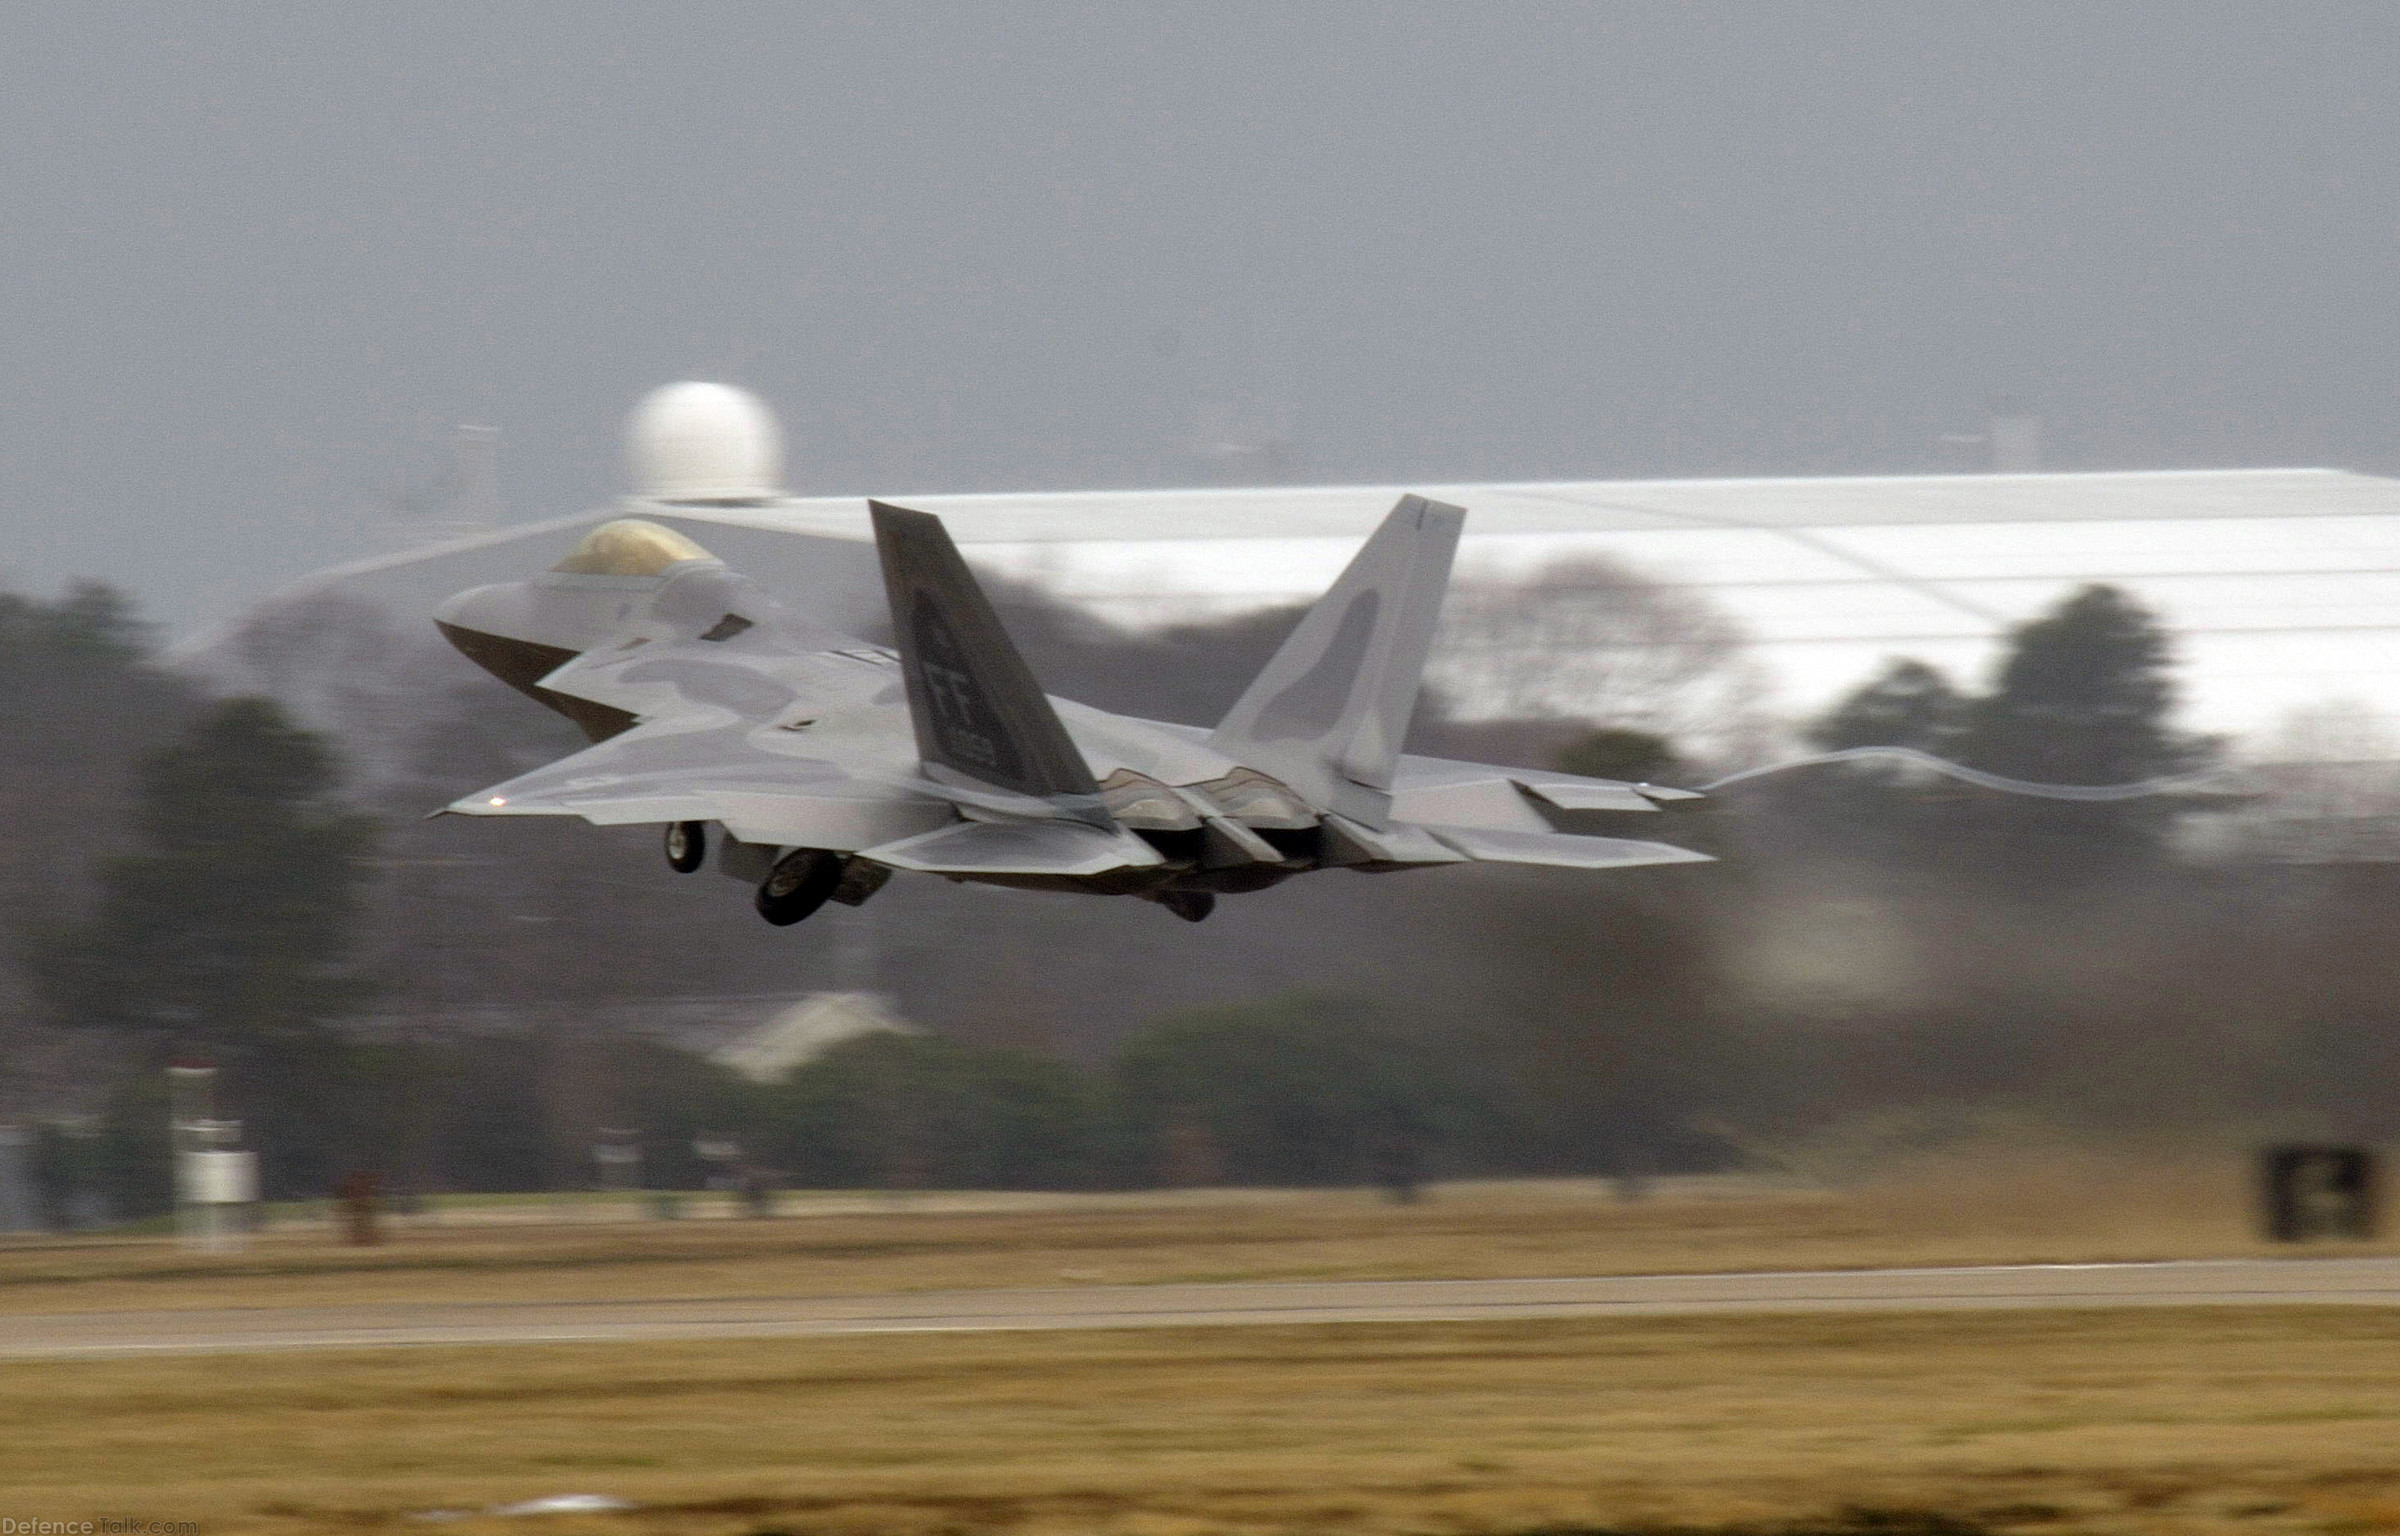 F-22 Raptor - Stealth Fighter Aircraft takes off